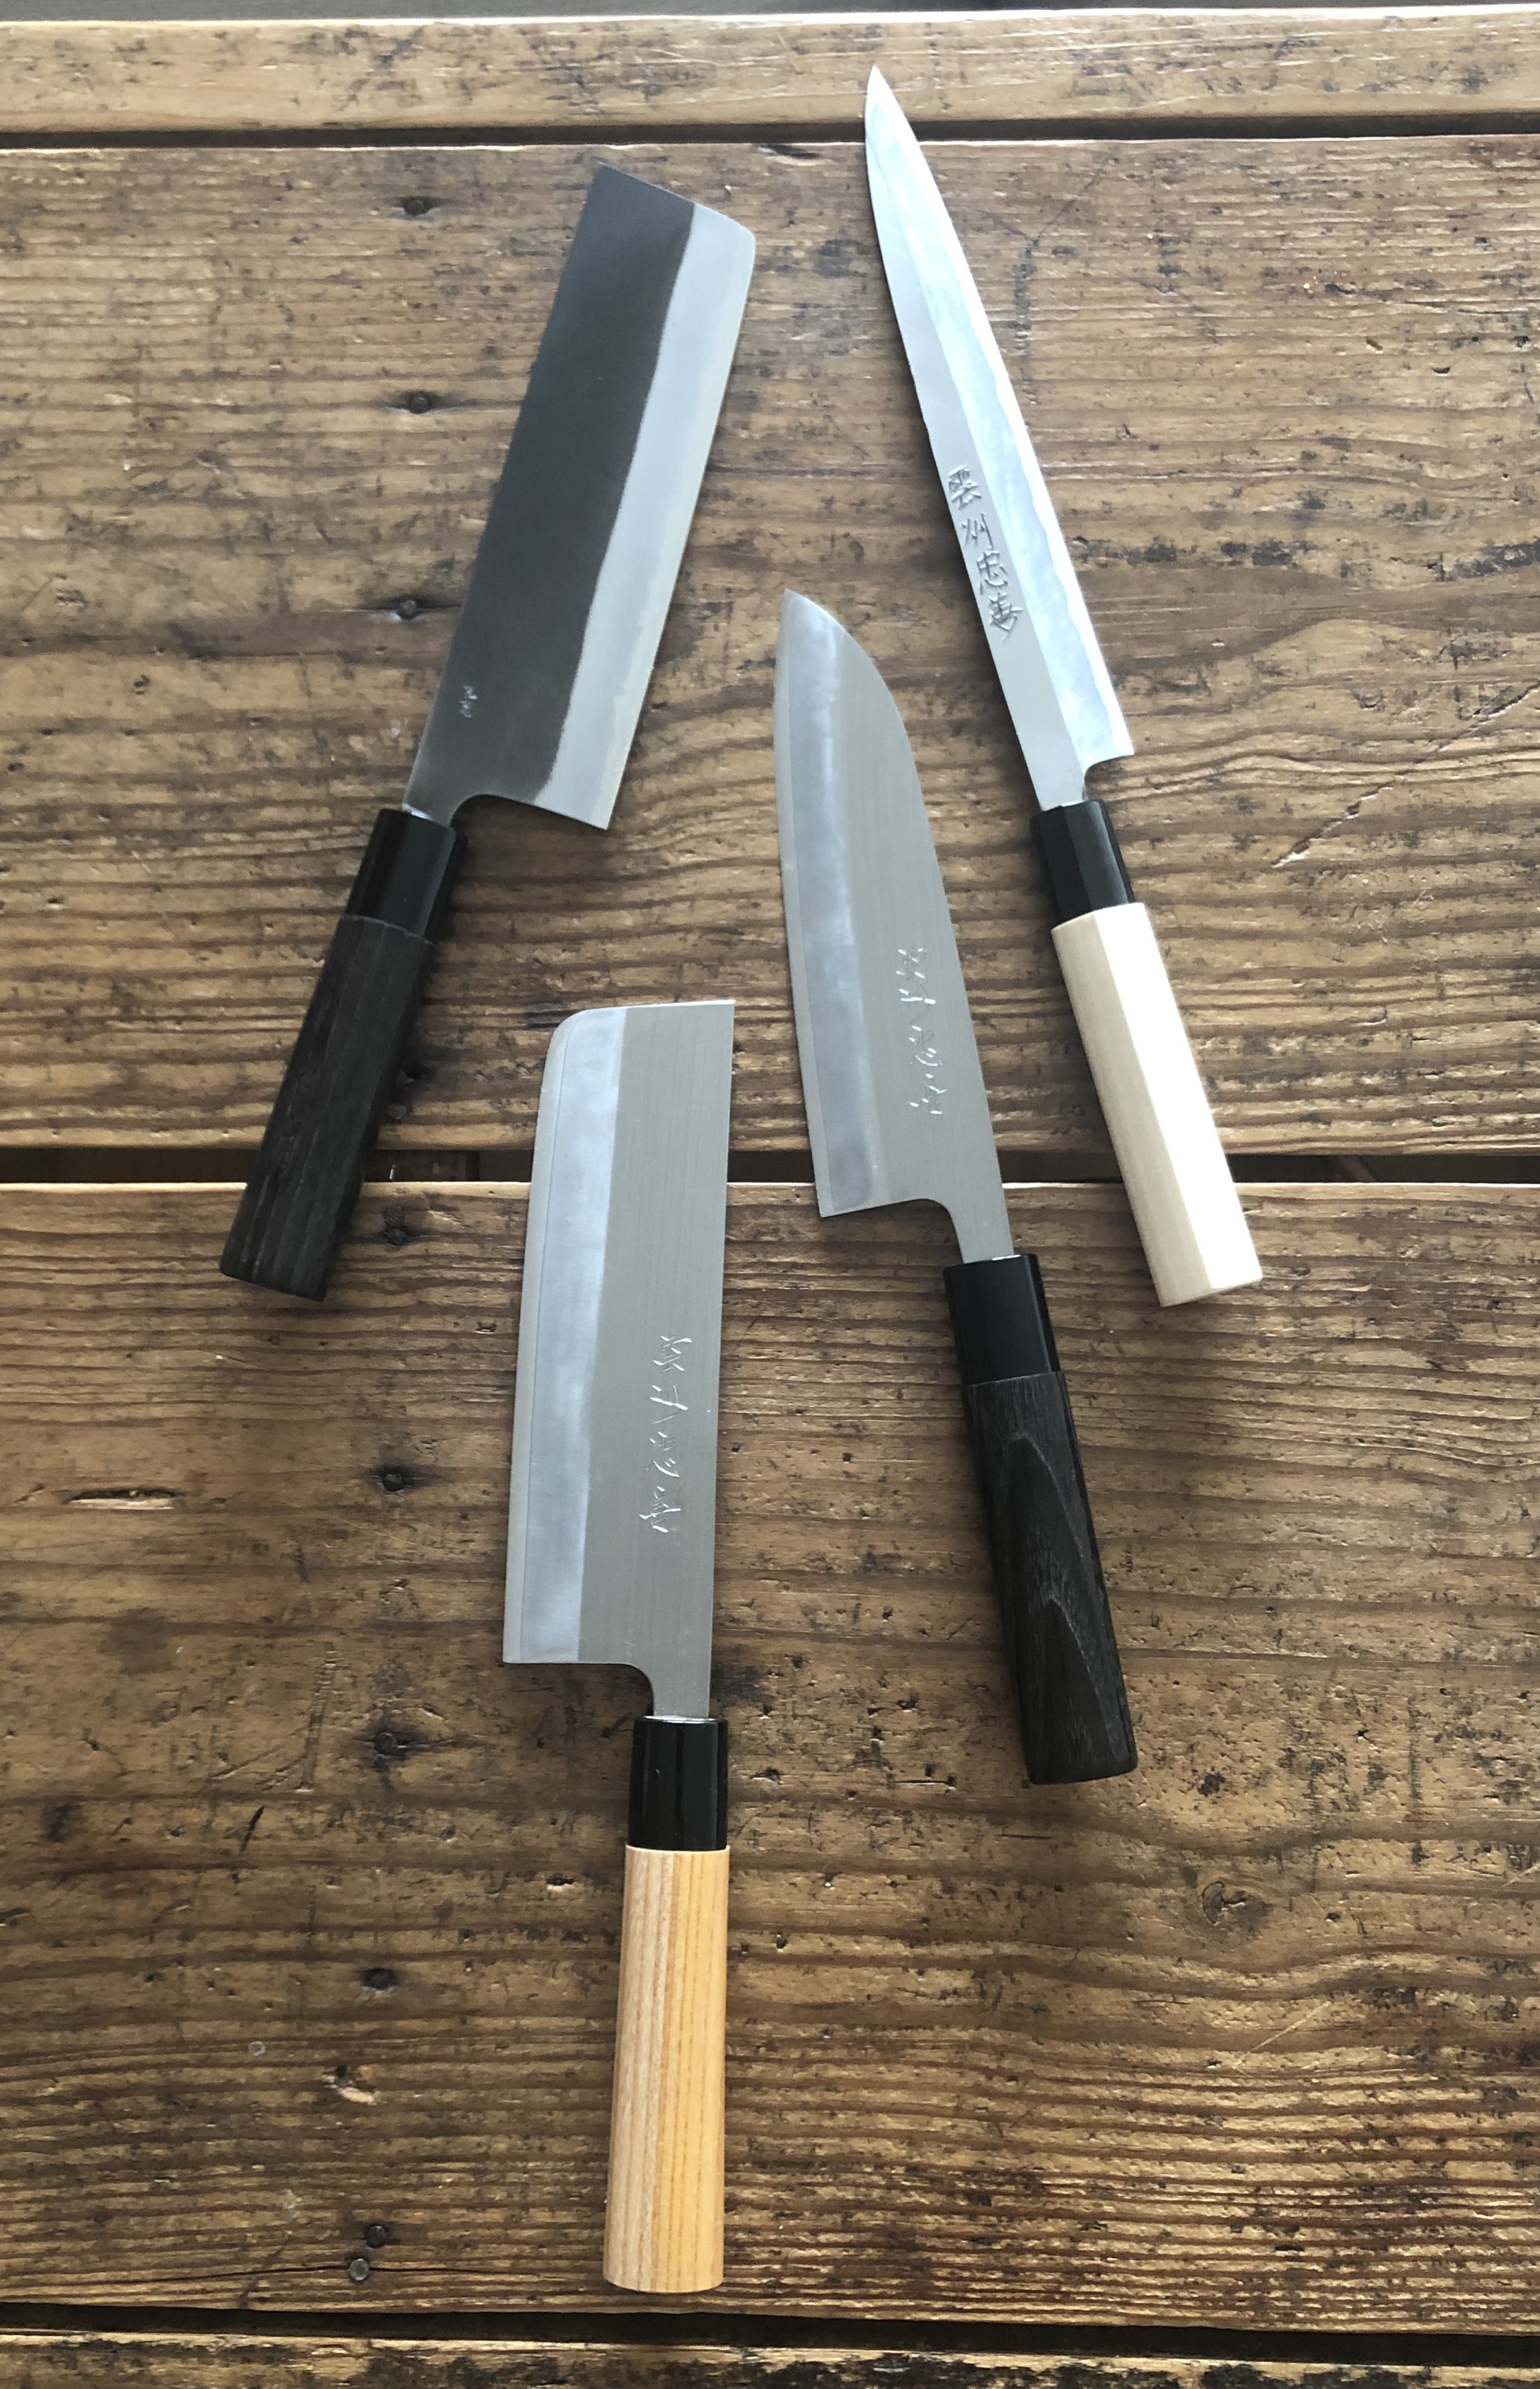 HIGH-QUALITY JAPANESE KNIVES: HOW TO CARE FOR YOUR KNIVES